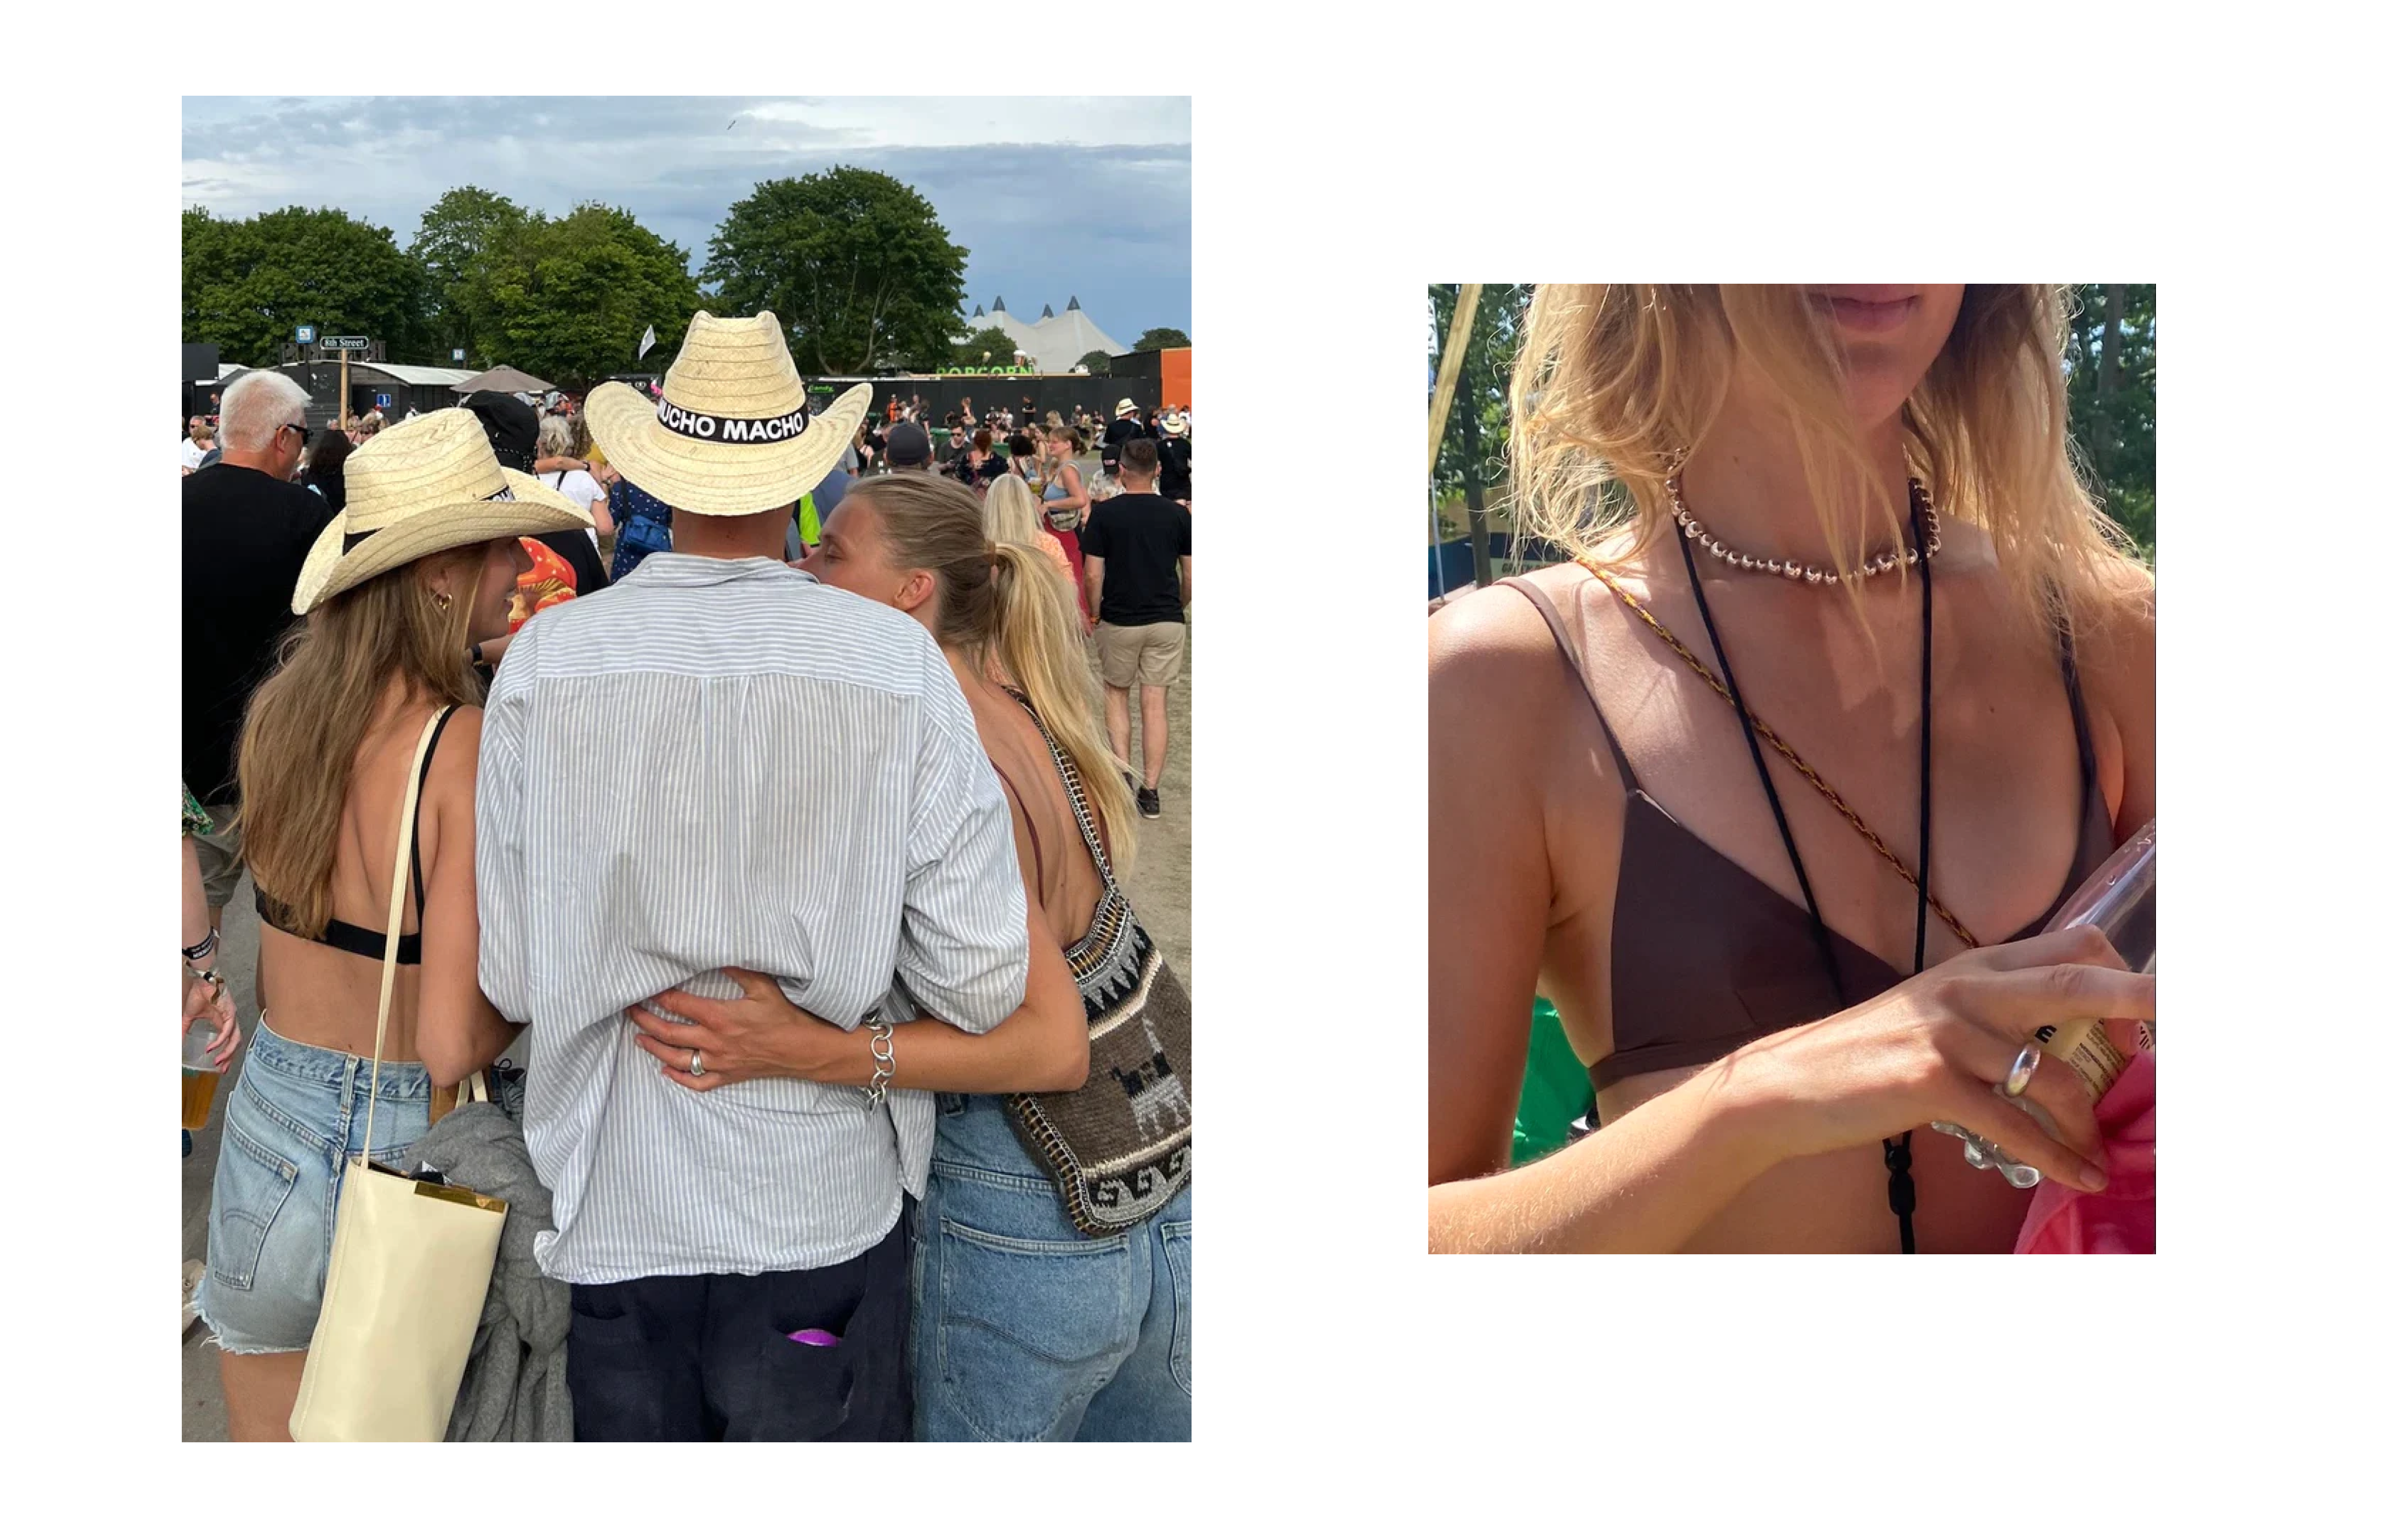 It's important not to get lost from one another at a festival. We reccomend a cowboy hat to avoid loosing sight of your friends